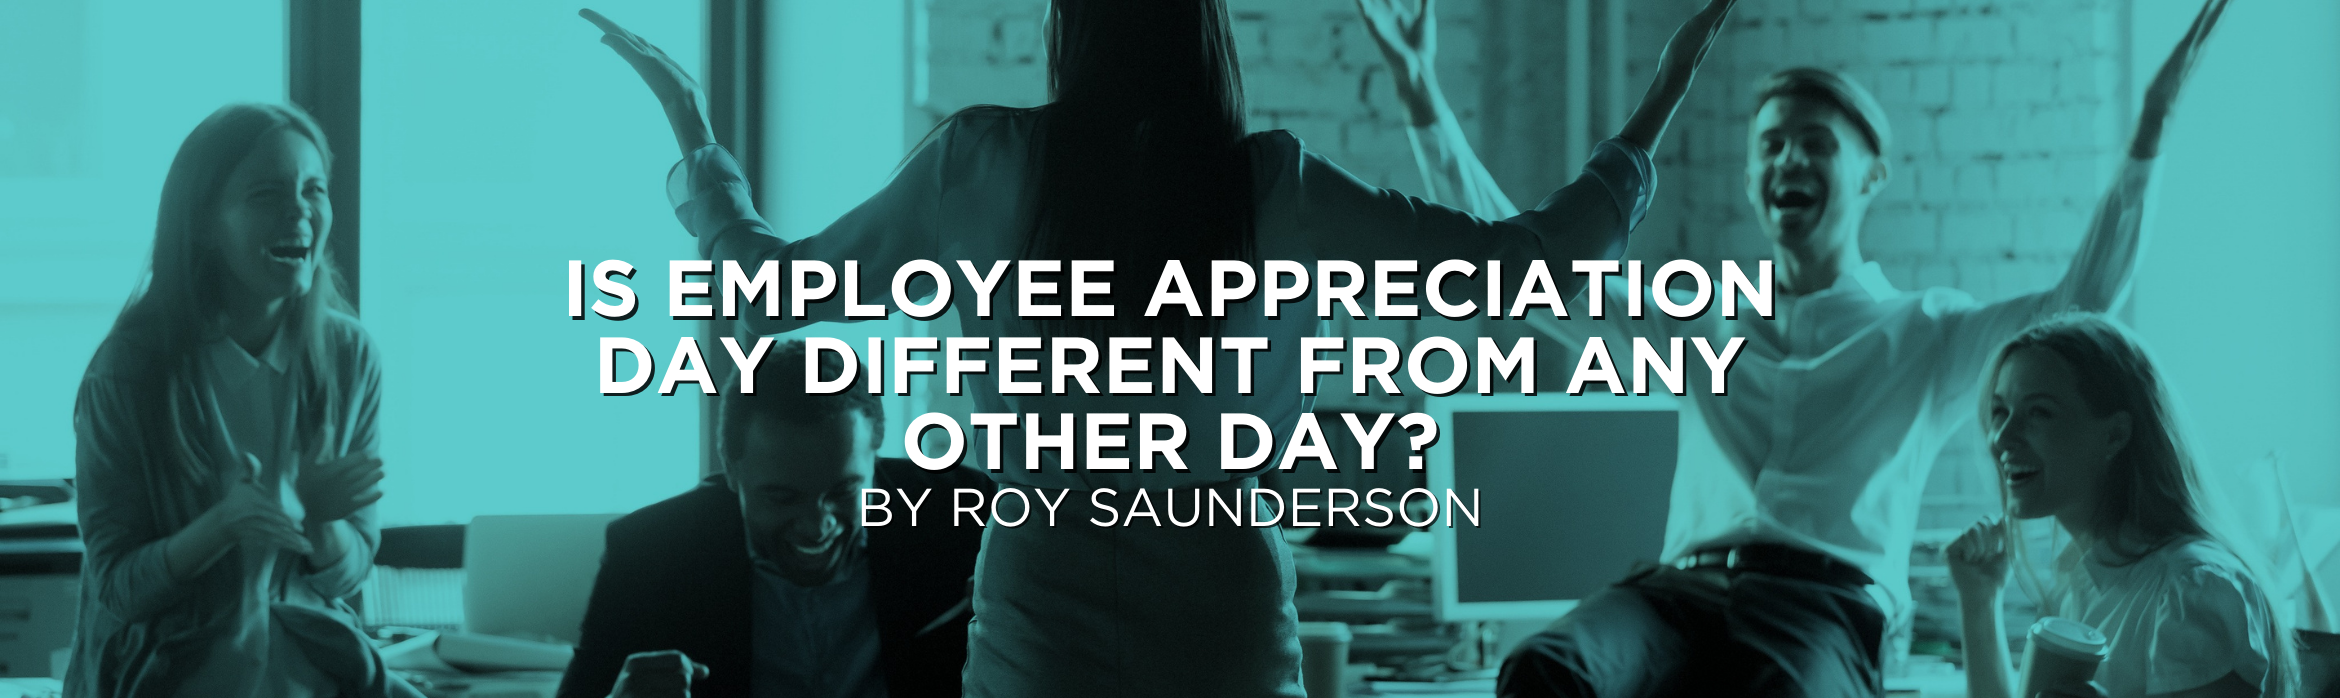 Is Employee Appreciation Day Different from Any Other Day?